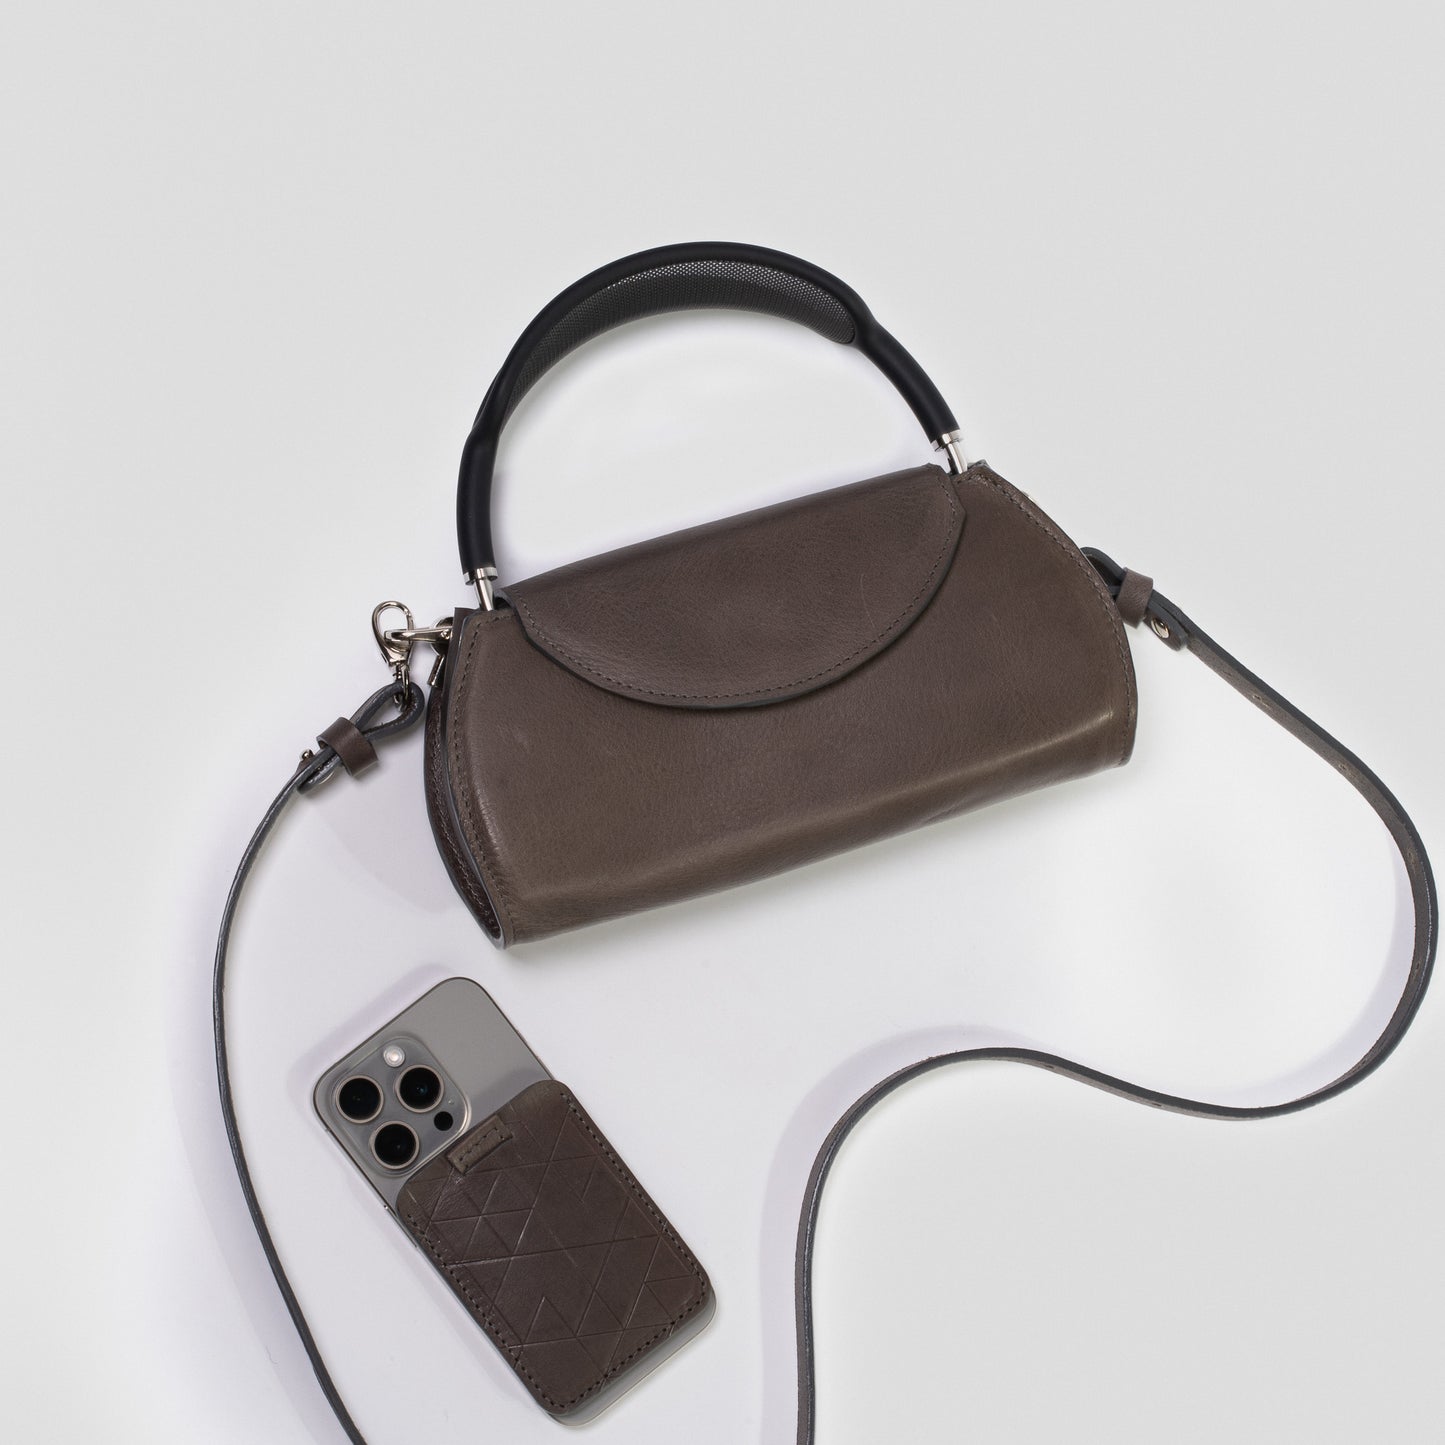 Gray leather case bag for AirPods Max made from premium top-grain Italian leather by Geometric Goods